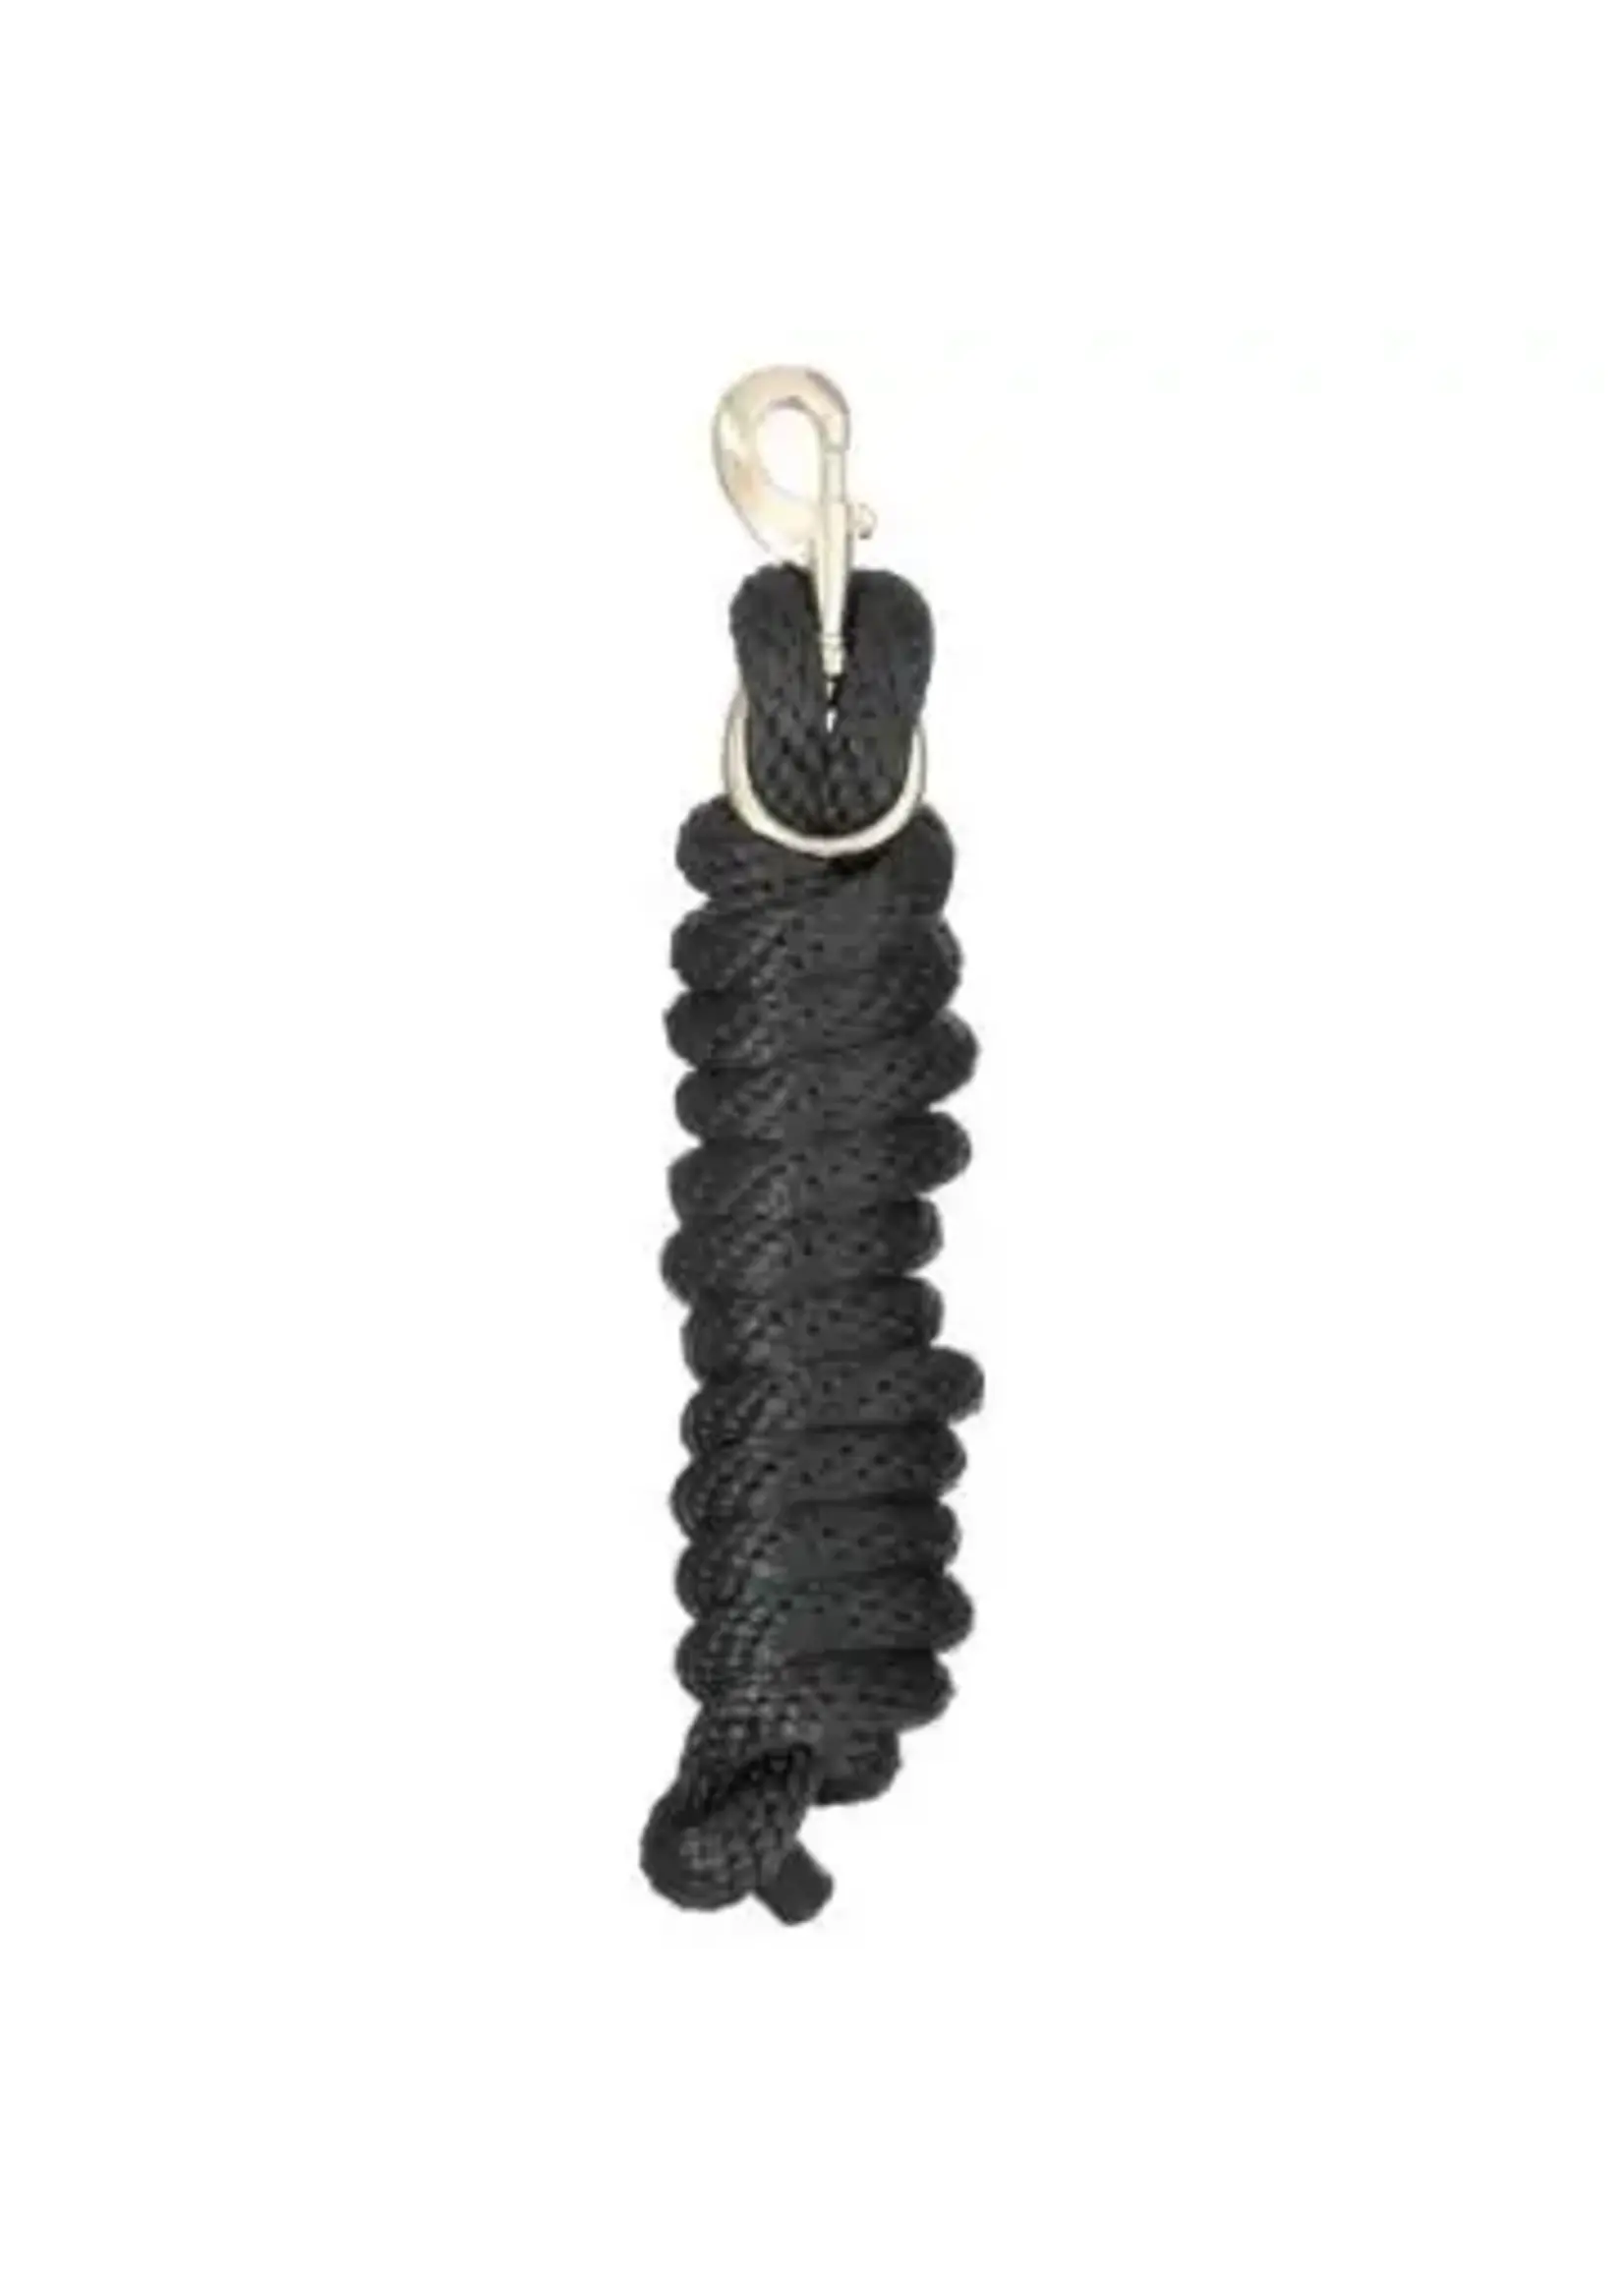 Tough 1 Poly Lead Rope with Bolt Snap - Tough 1 -